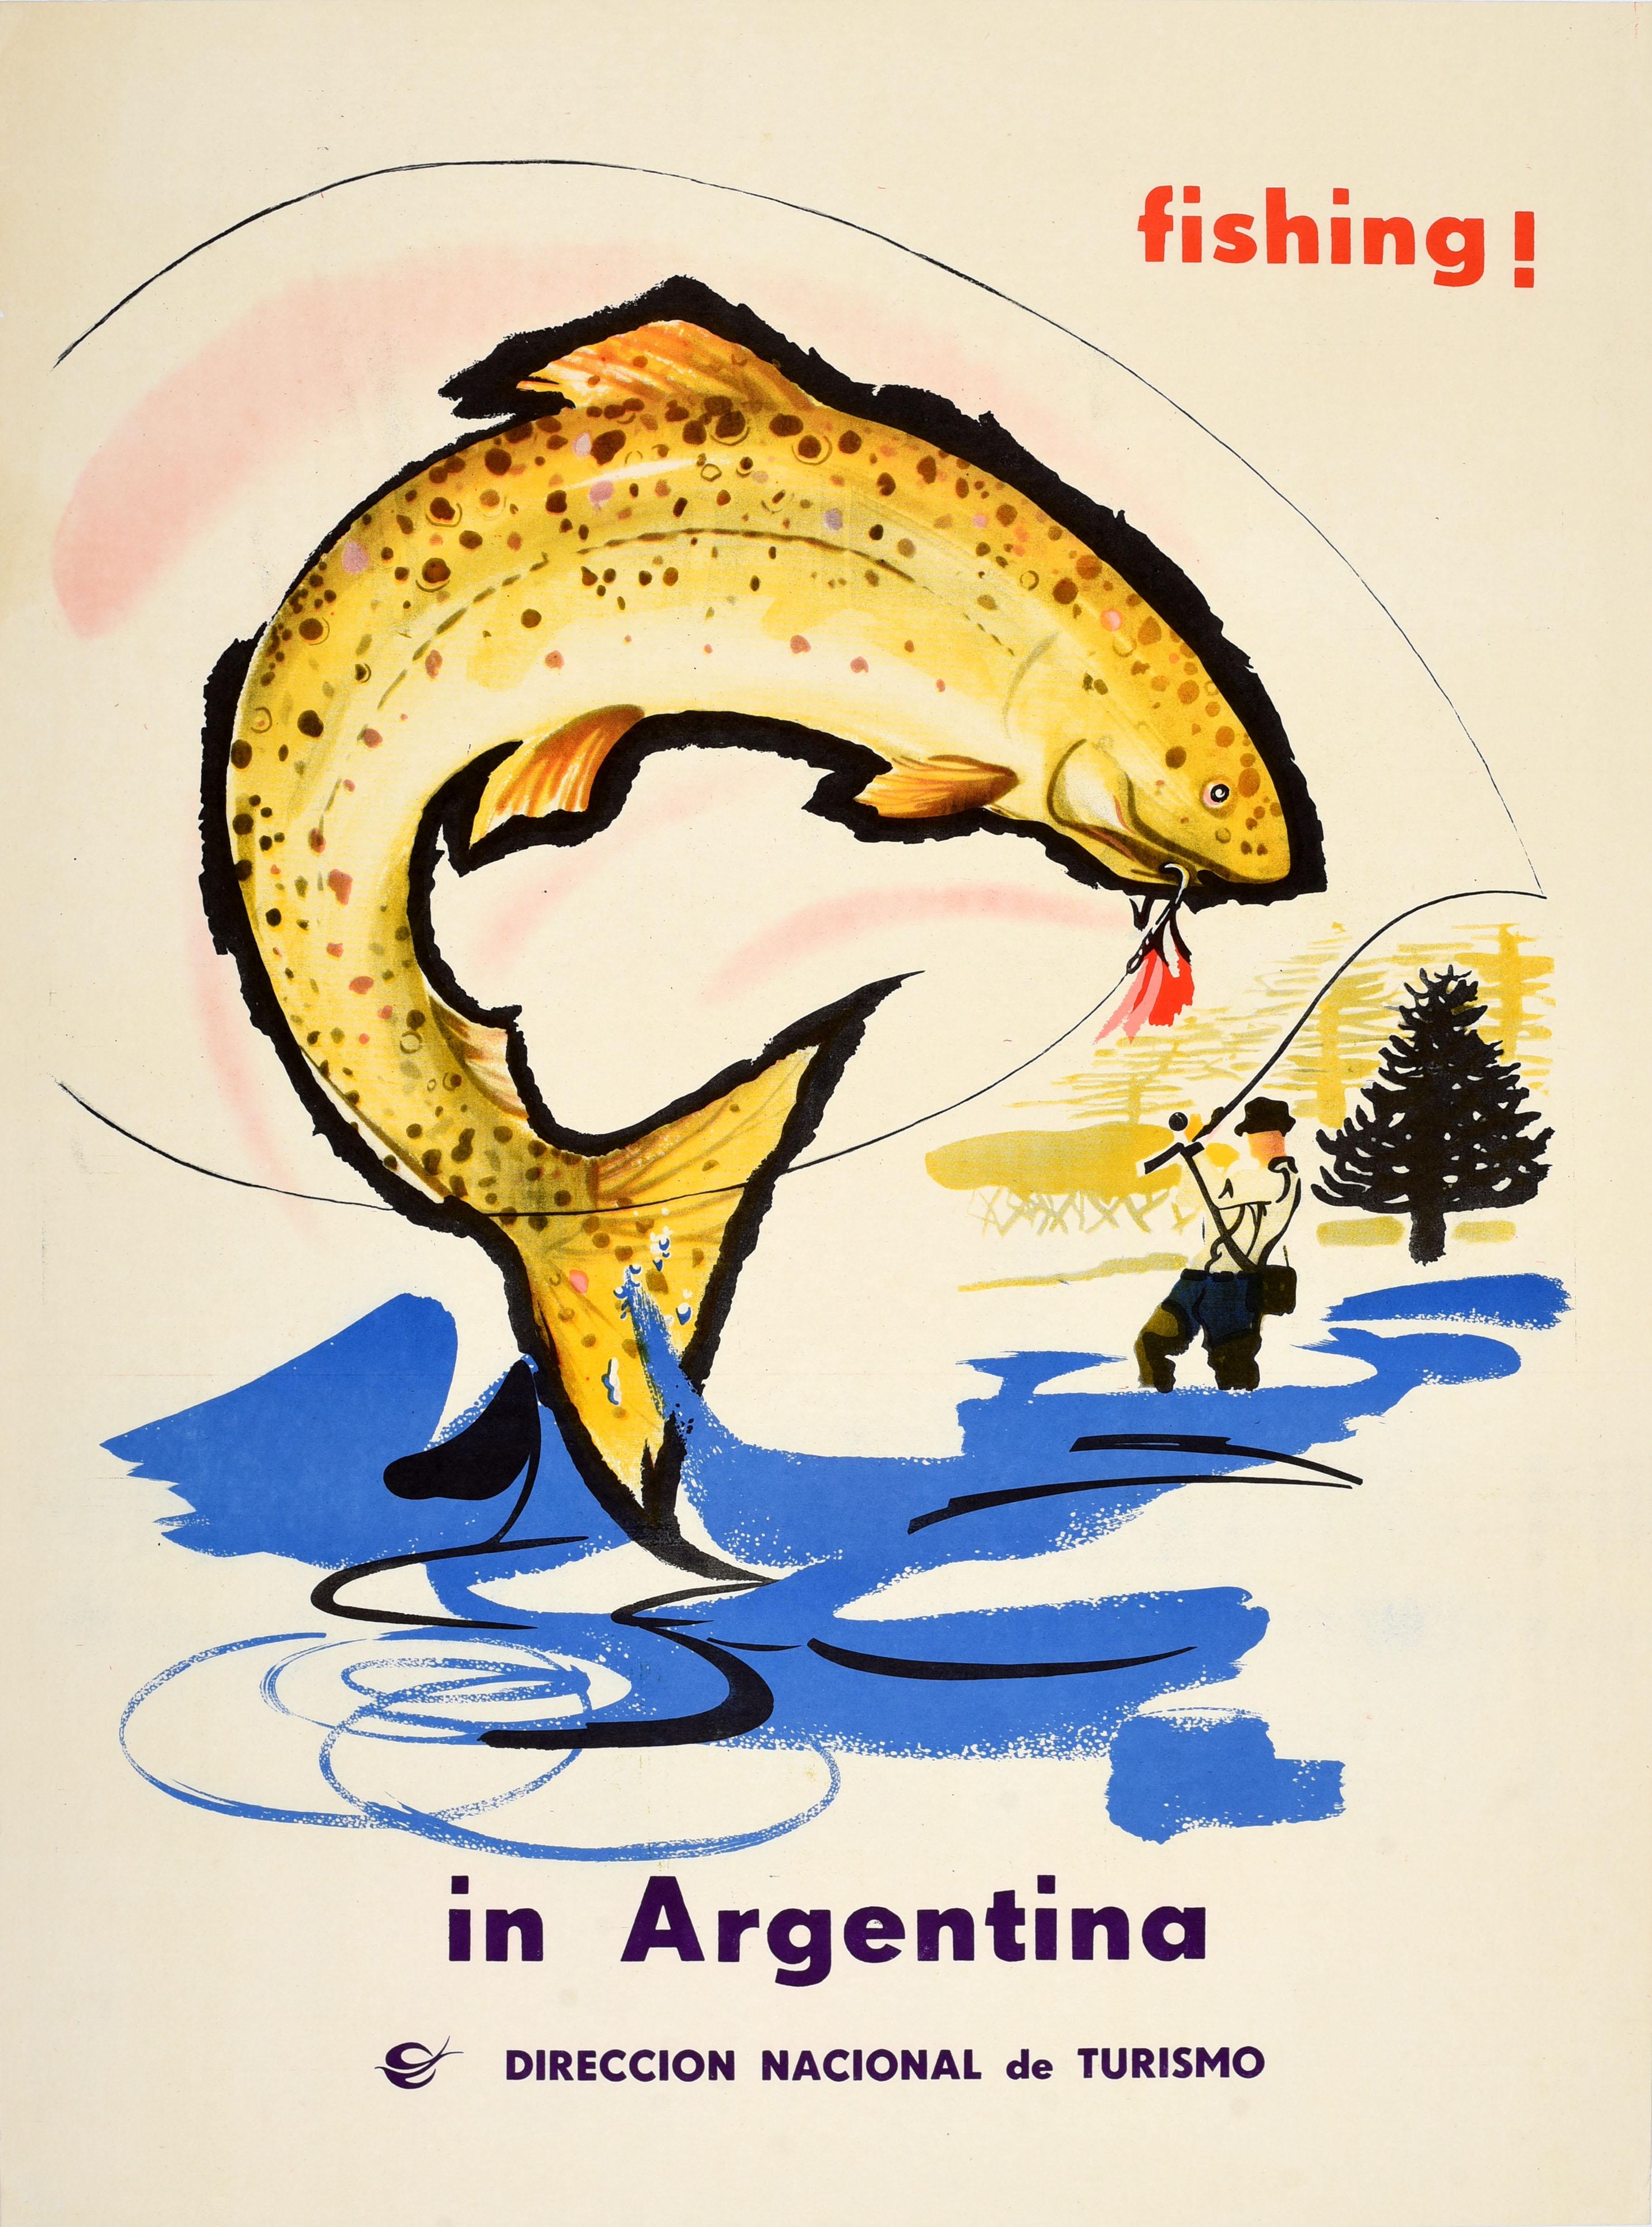 Unknown Print - Original Vintage Travel Poster Fly Fishing Argentina Tourism Trout Fisherman